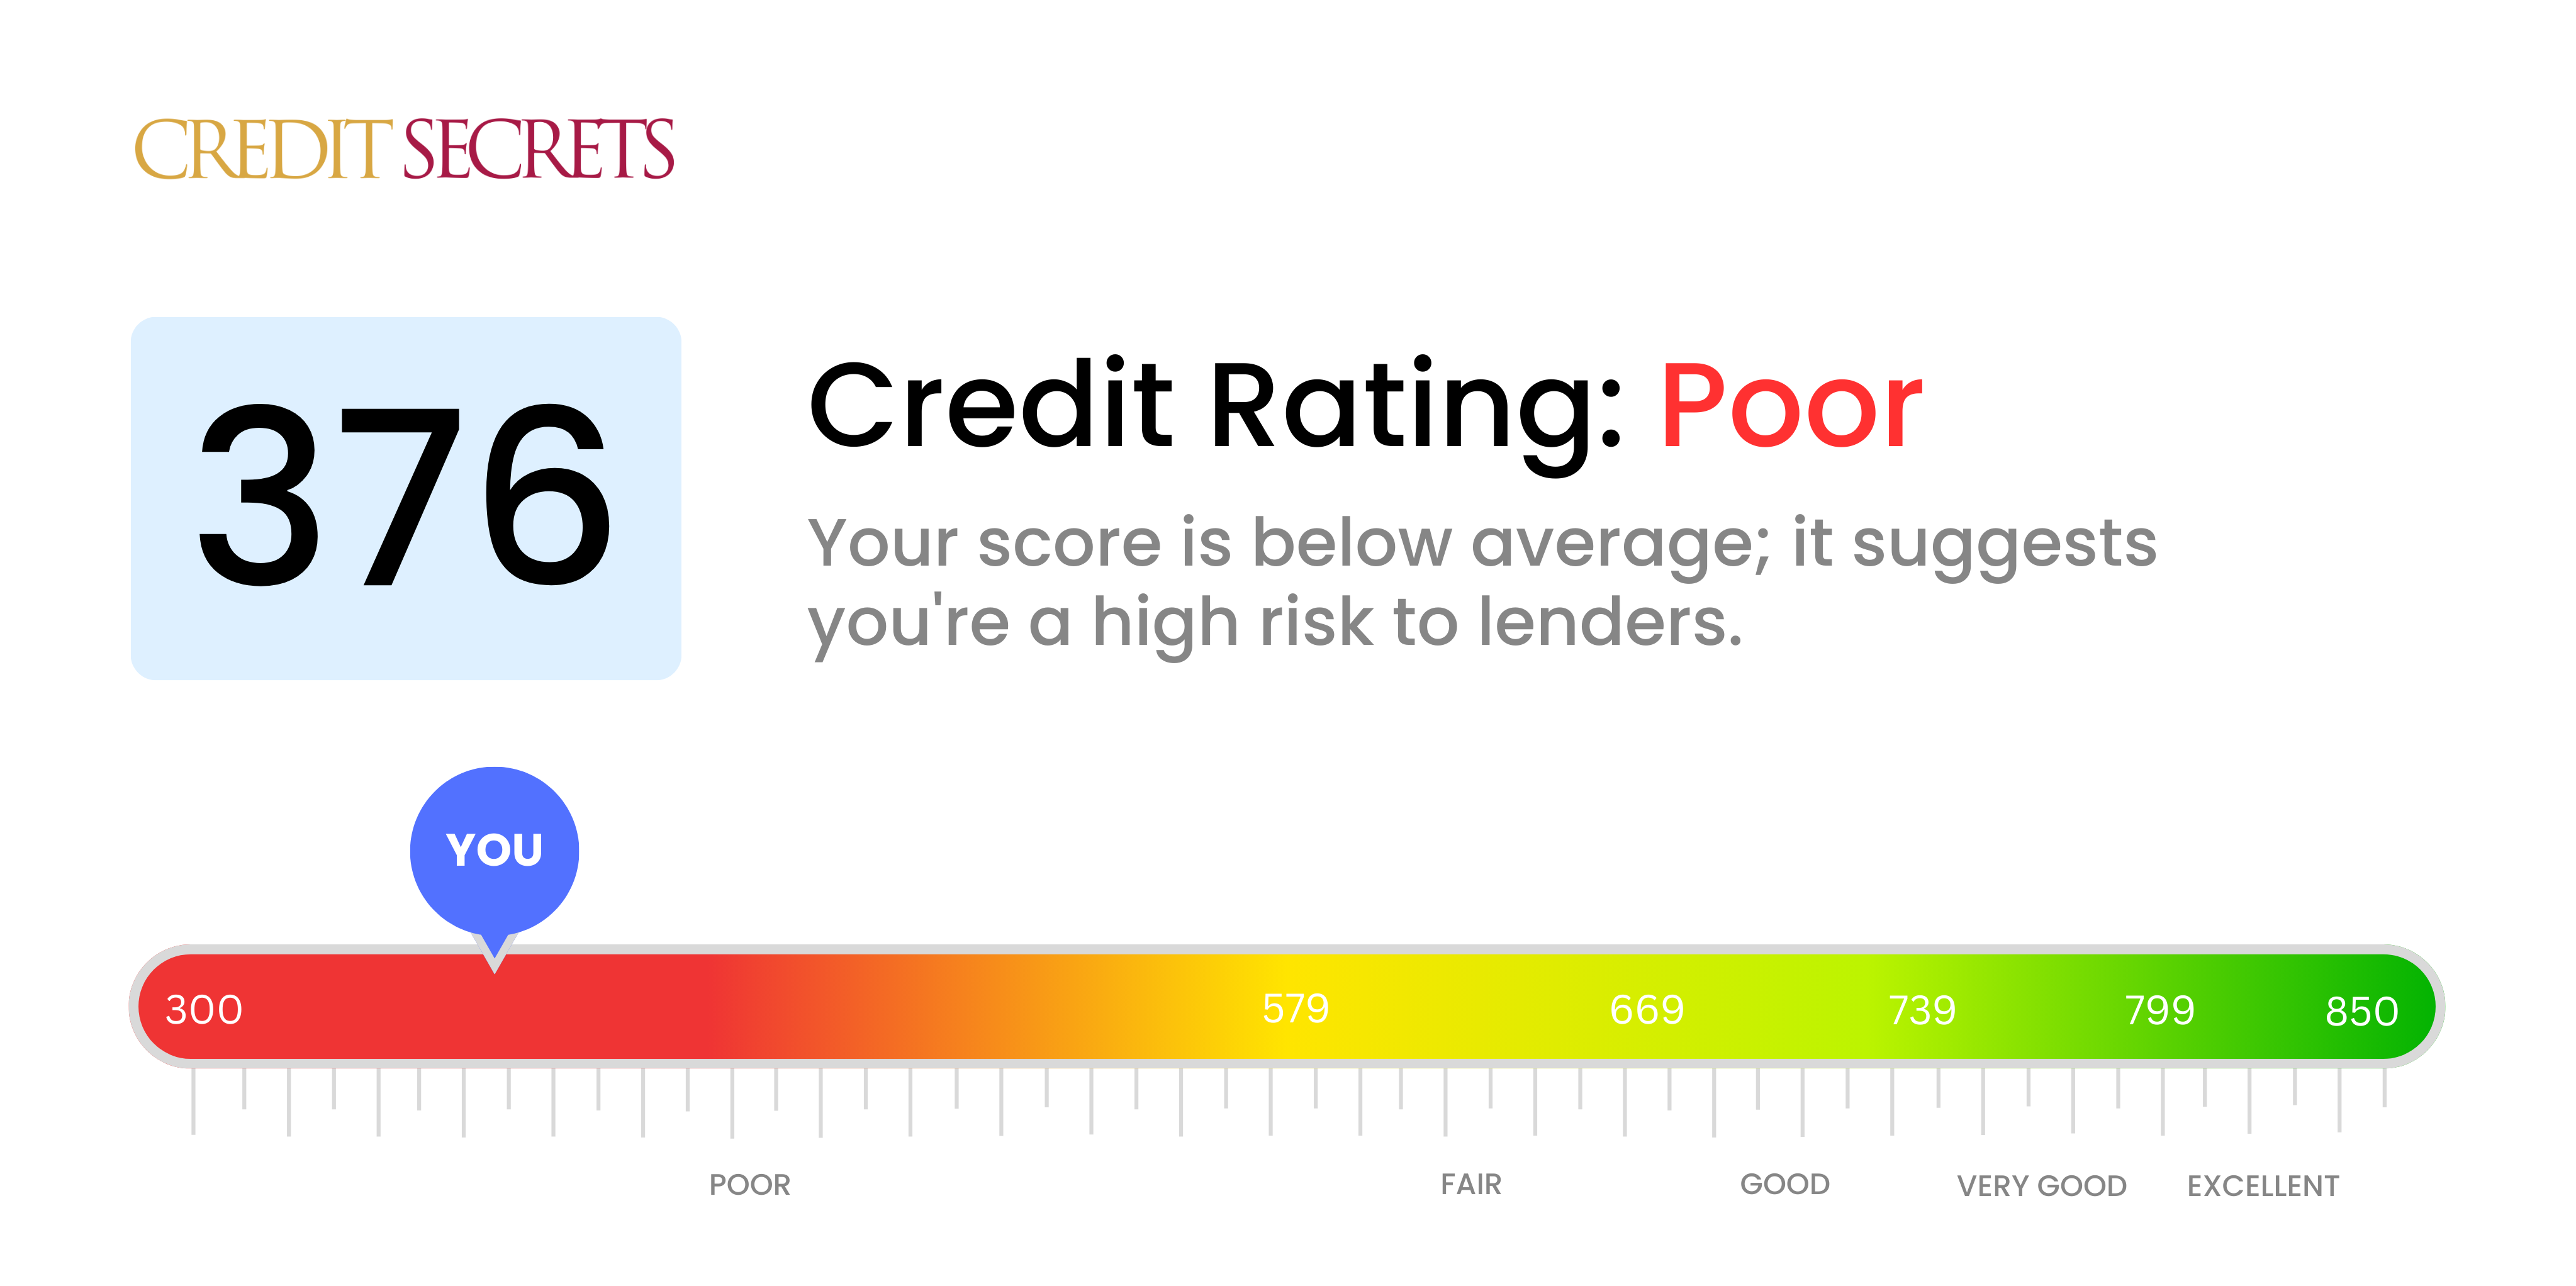 Is 376 a good credit score?